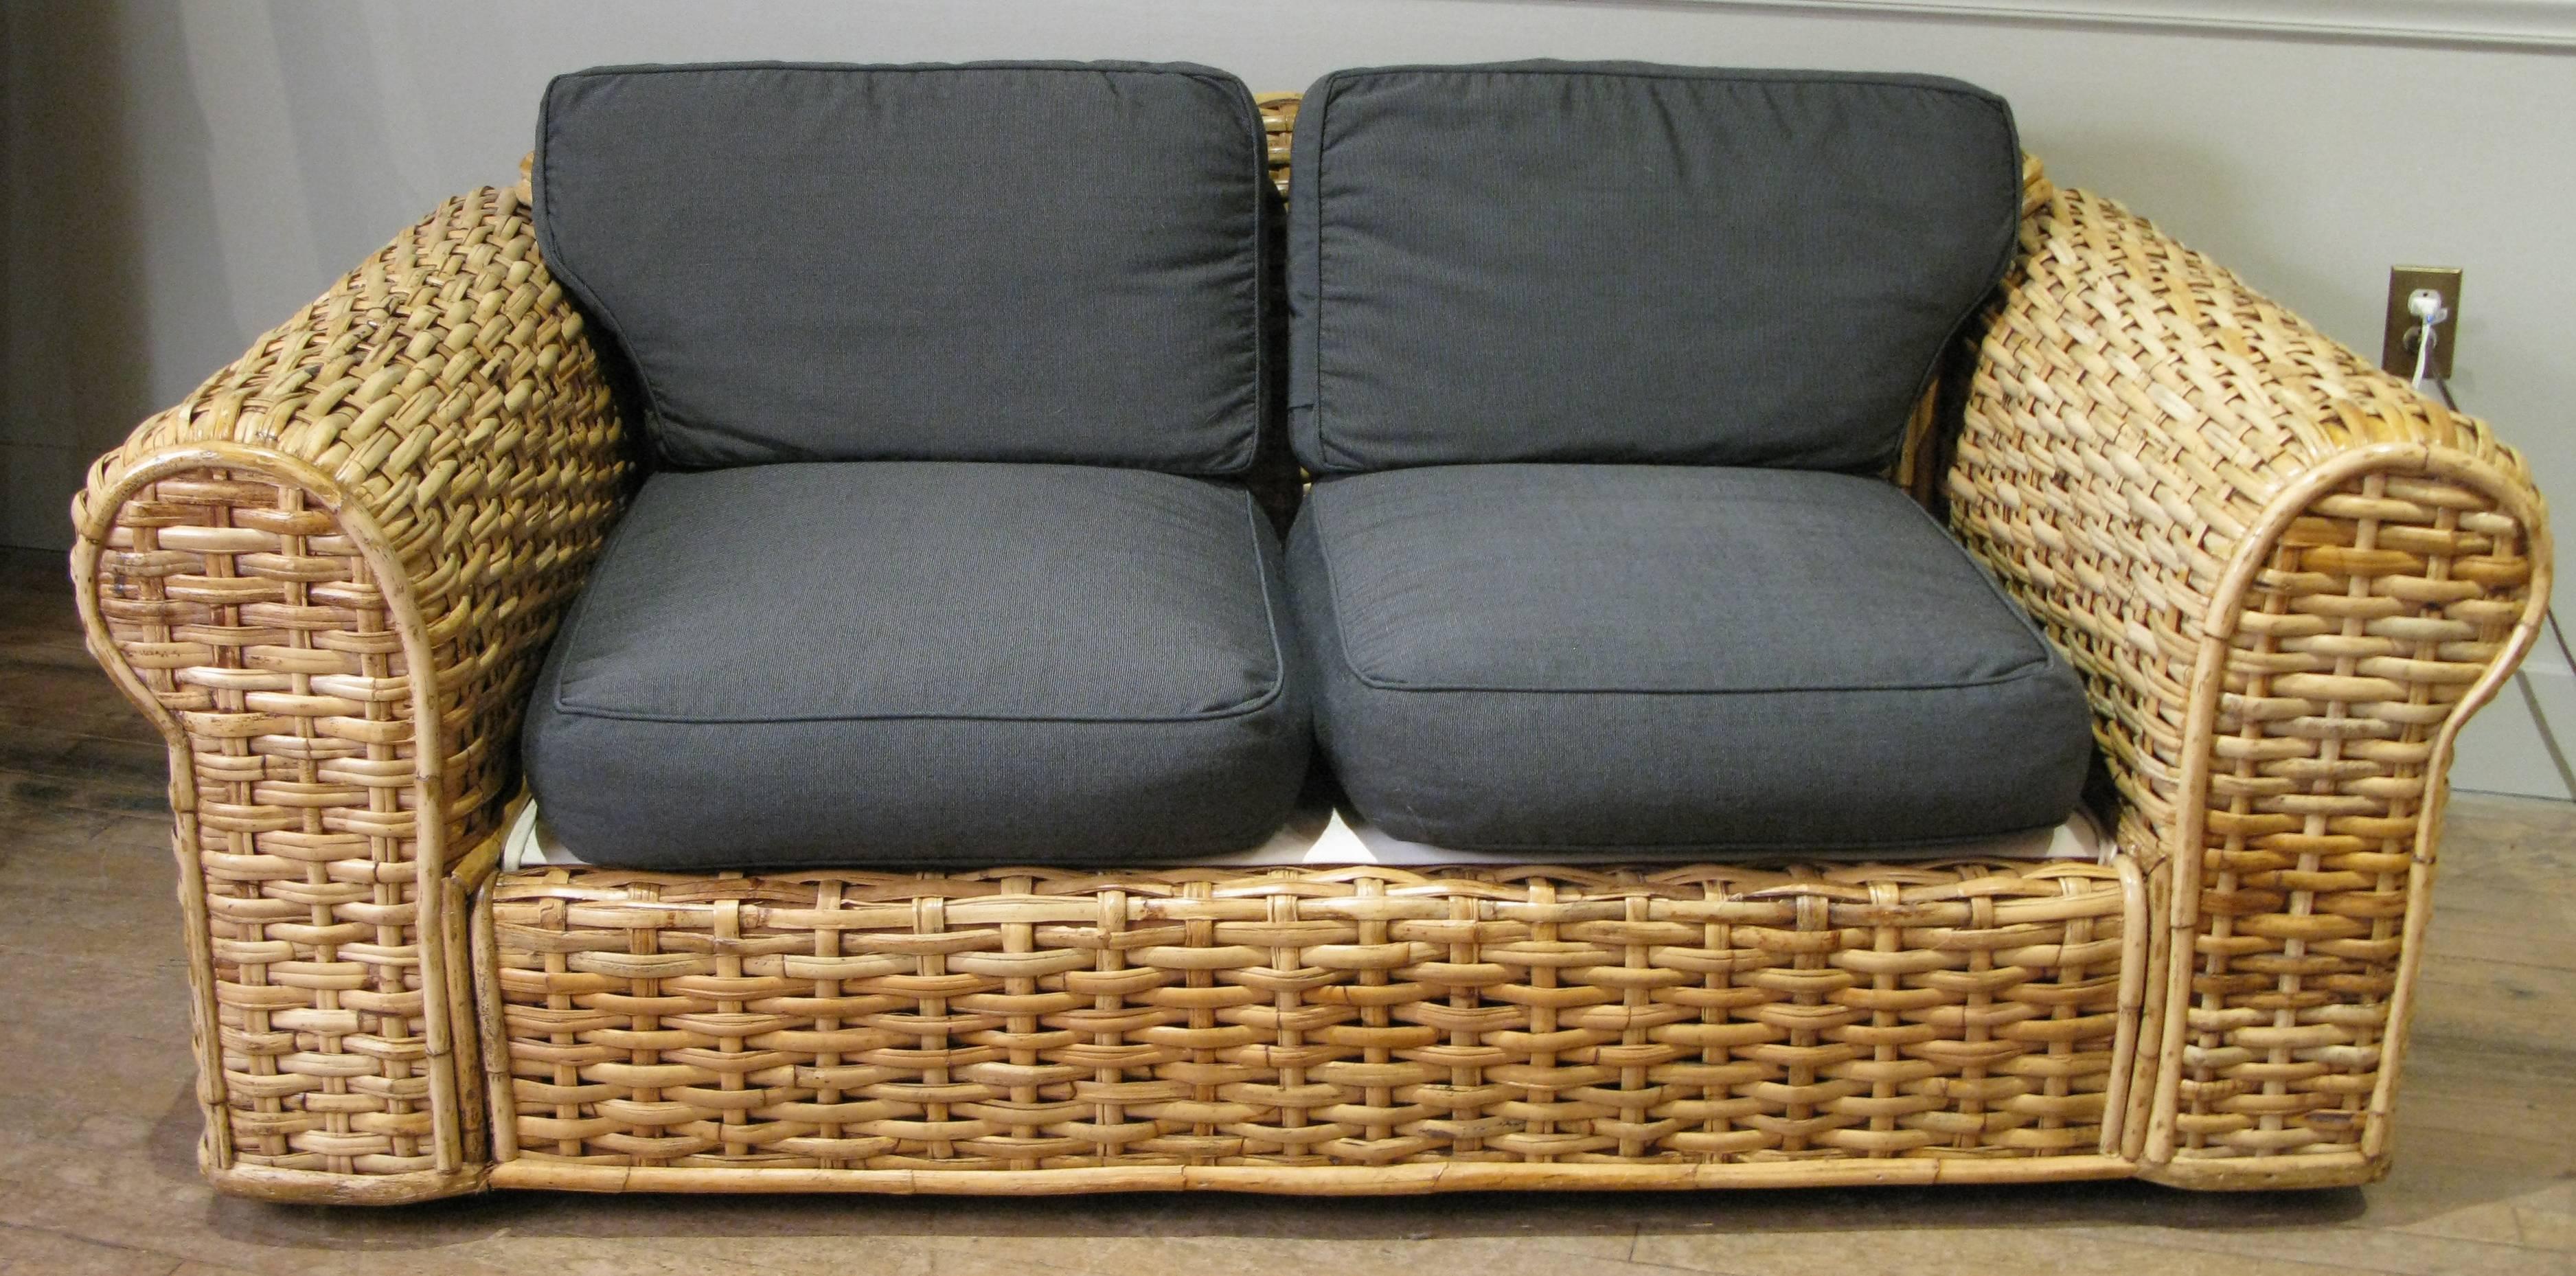 A beautiful and gracious two-seat sofa or settee by Ralph Lauren Home, in large-scale woven rattan. Extremely well made and very comfortable, the cushions have two sets of covers, a dark grey woven file, and a set of white cotton duck covers, both